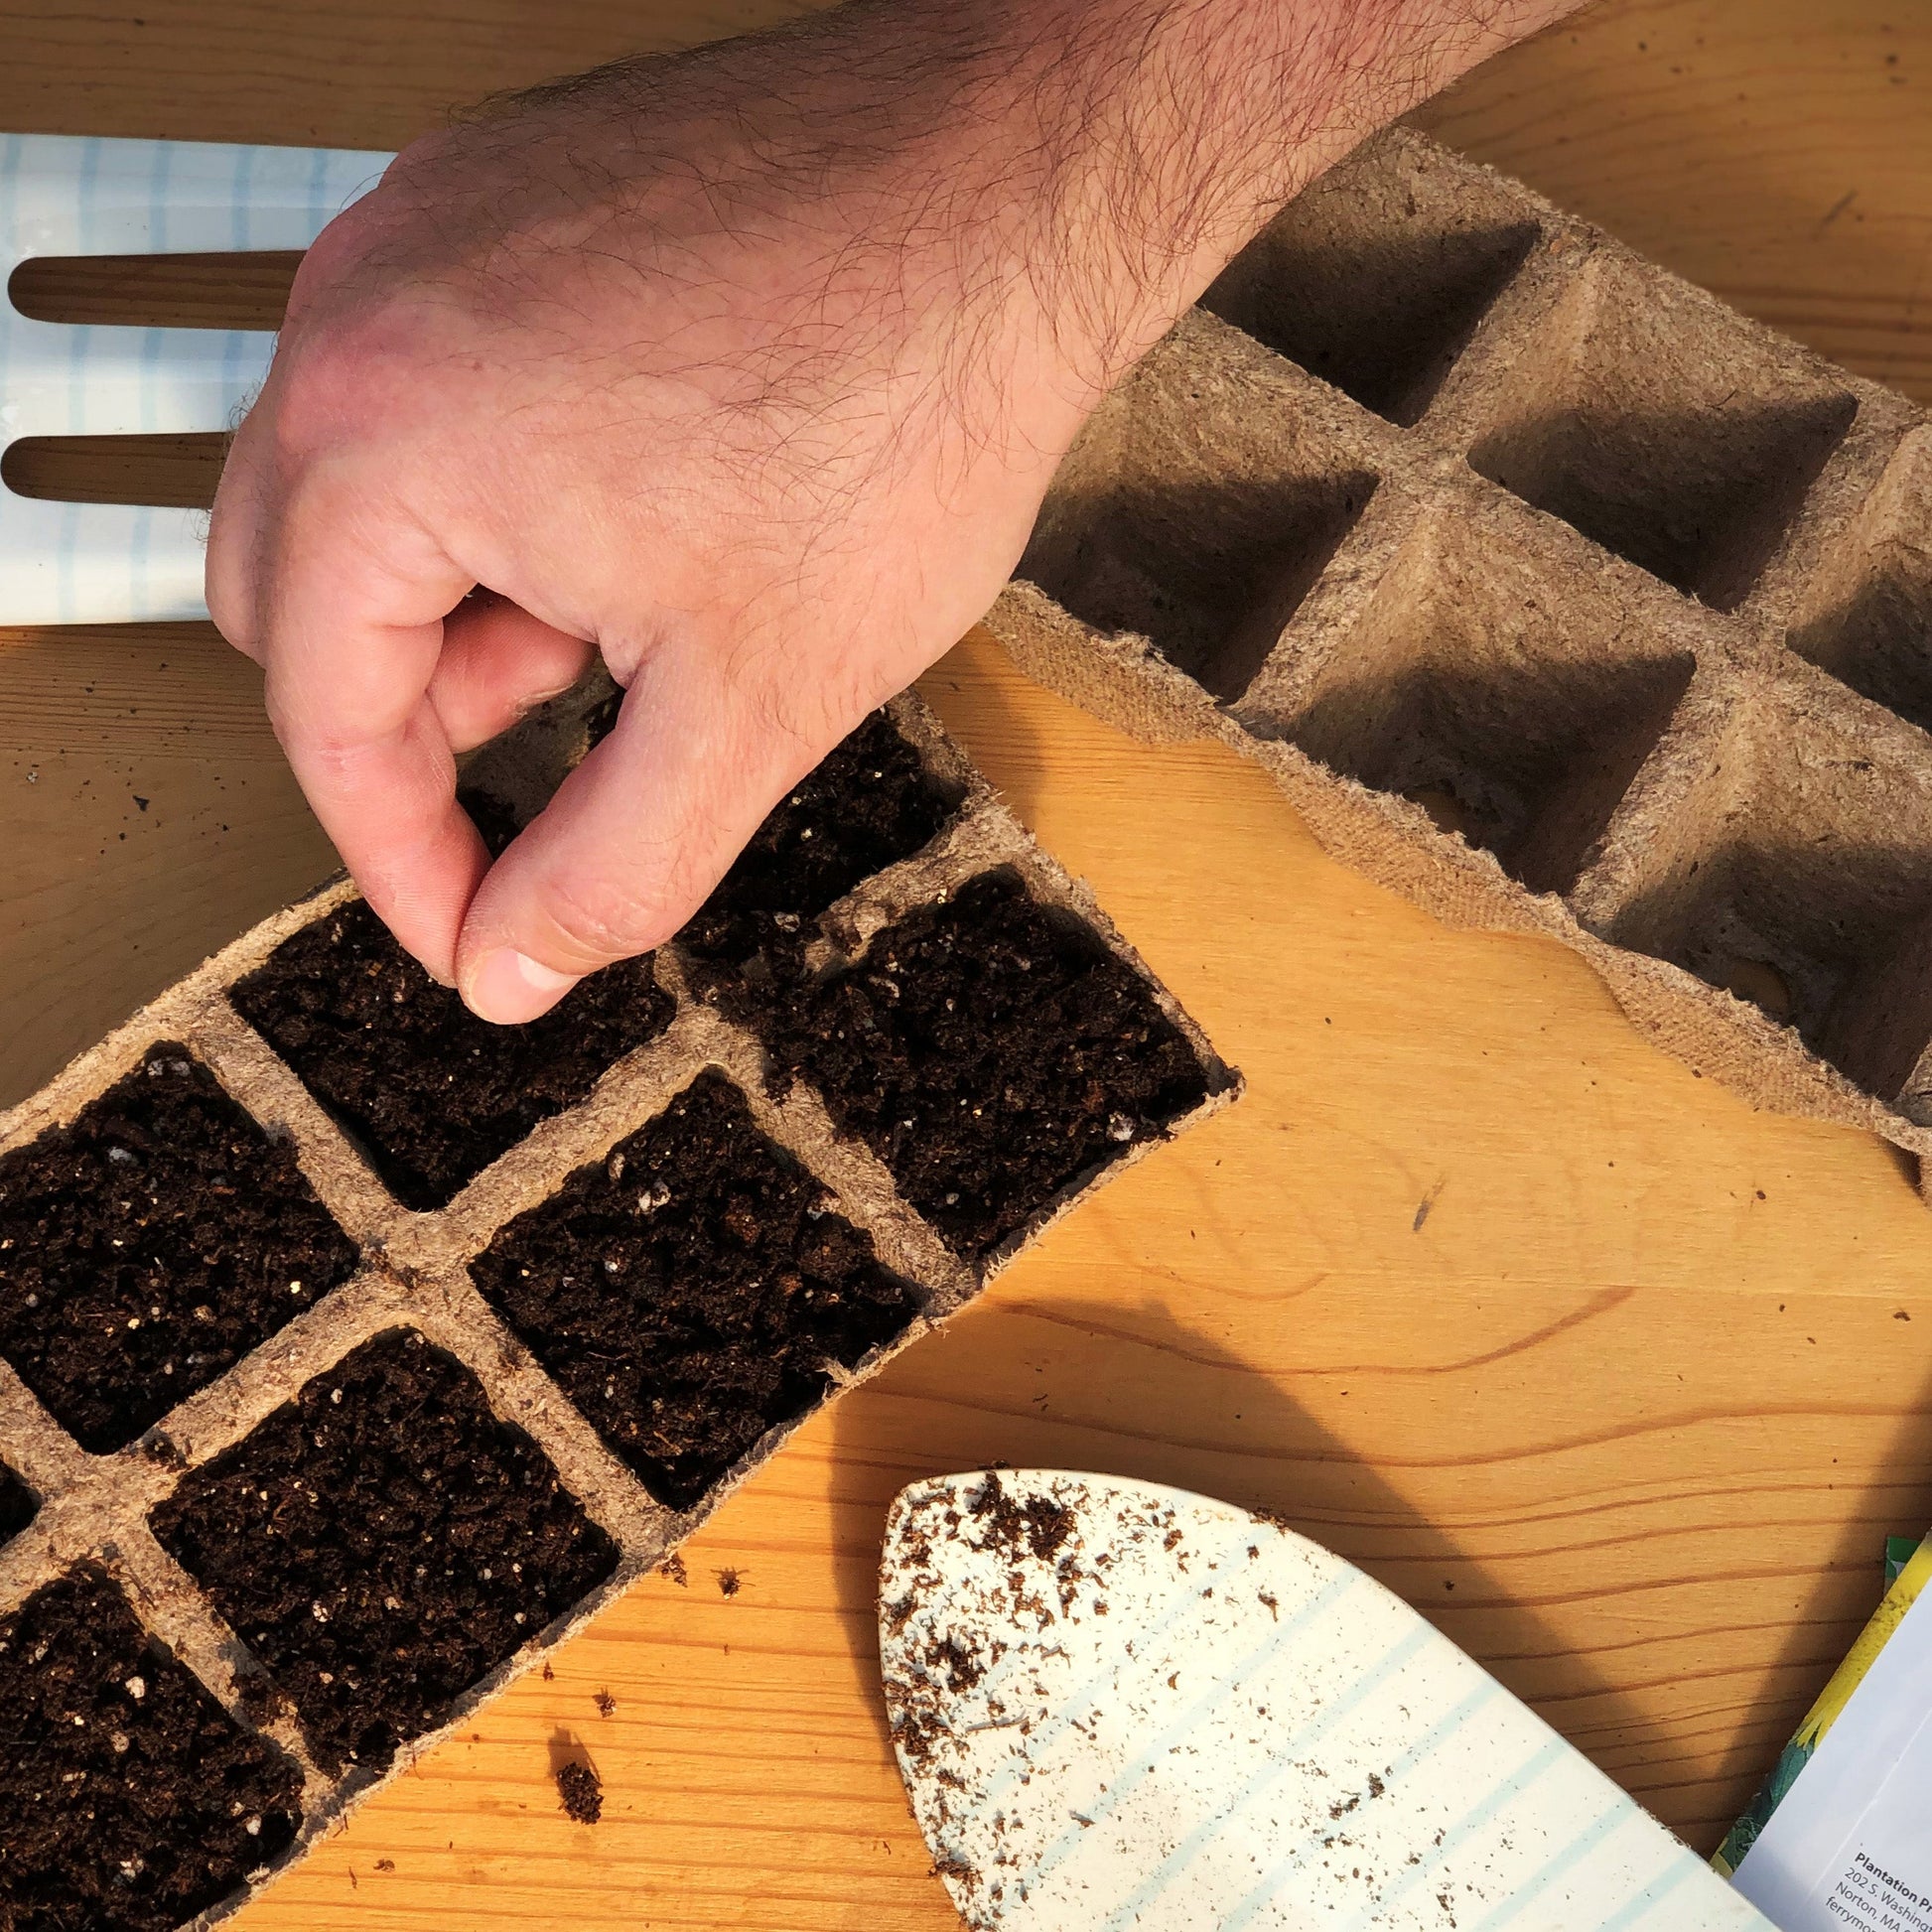 Start your Serrano Chili Peppers seeds in biodegradable peat strip trays filled with sowing mix.